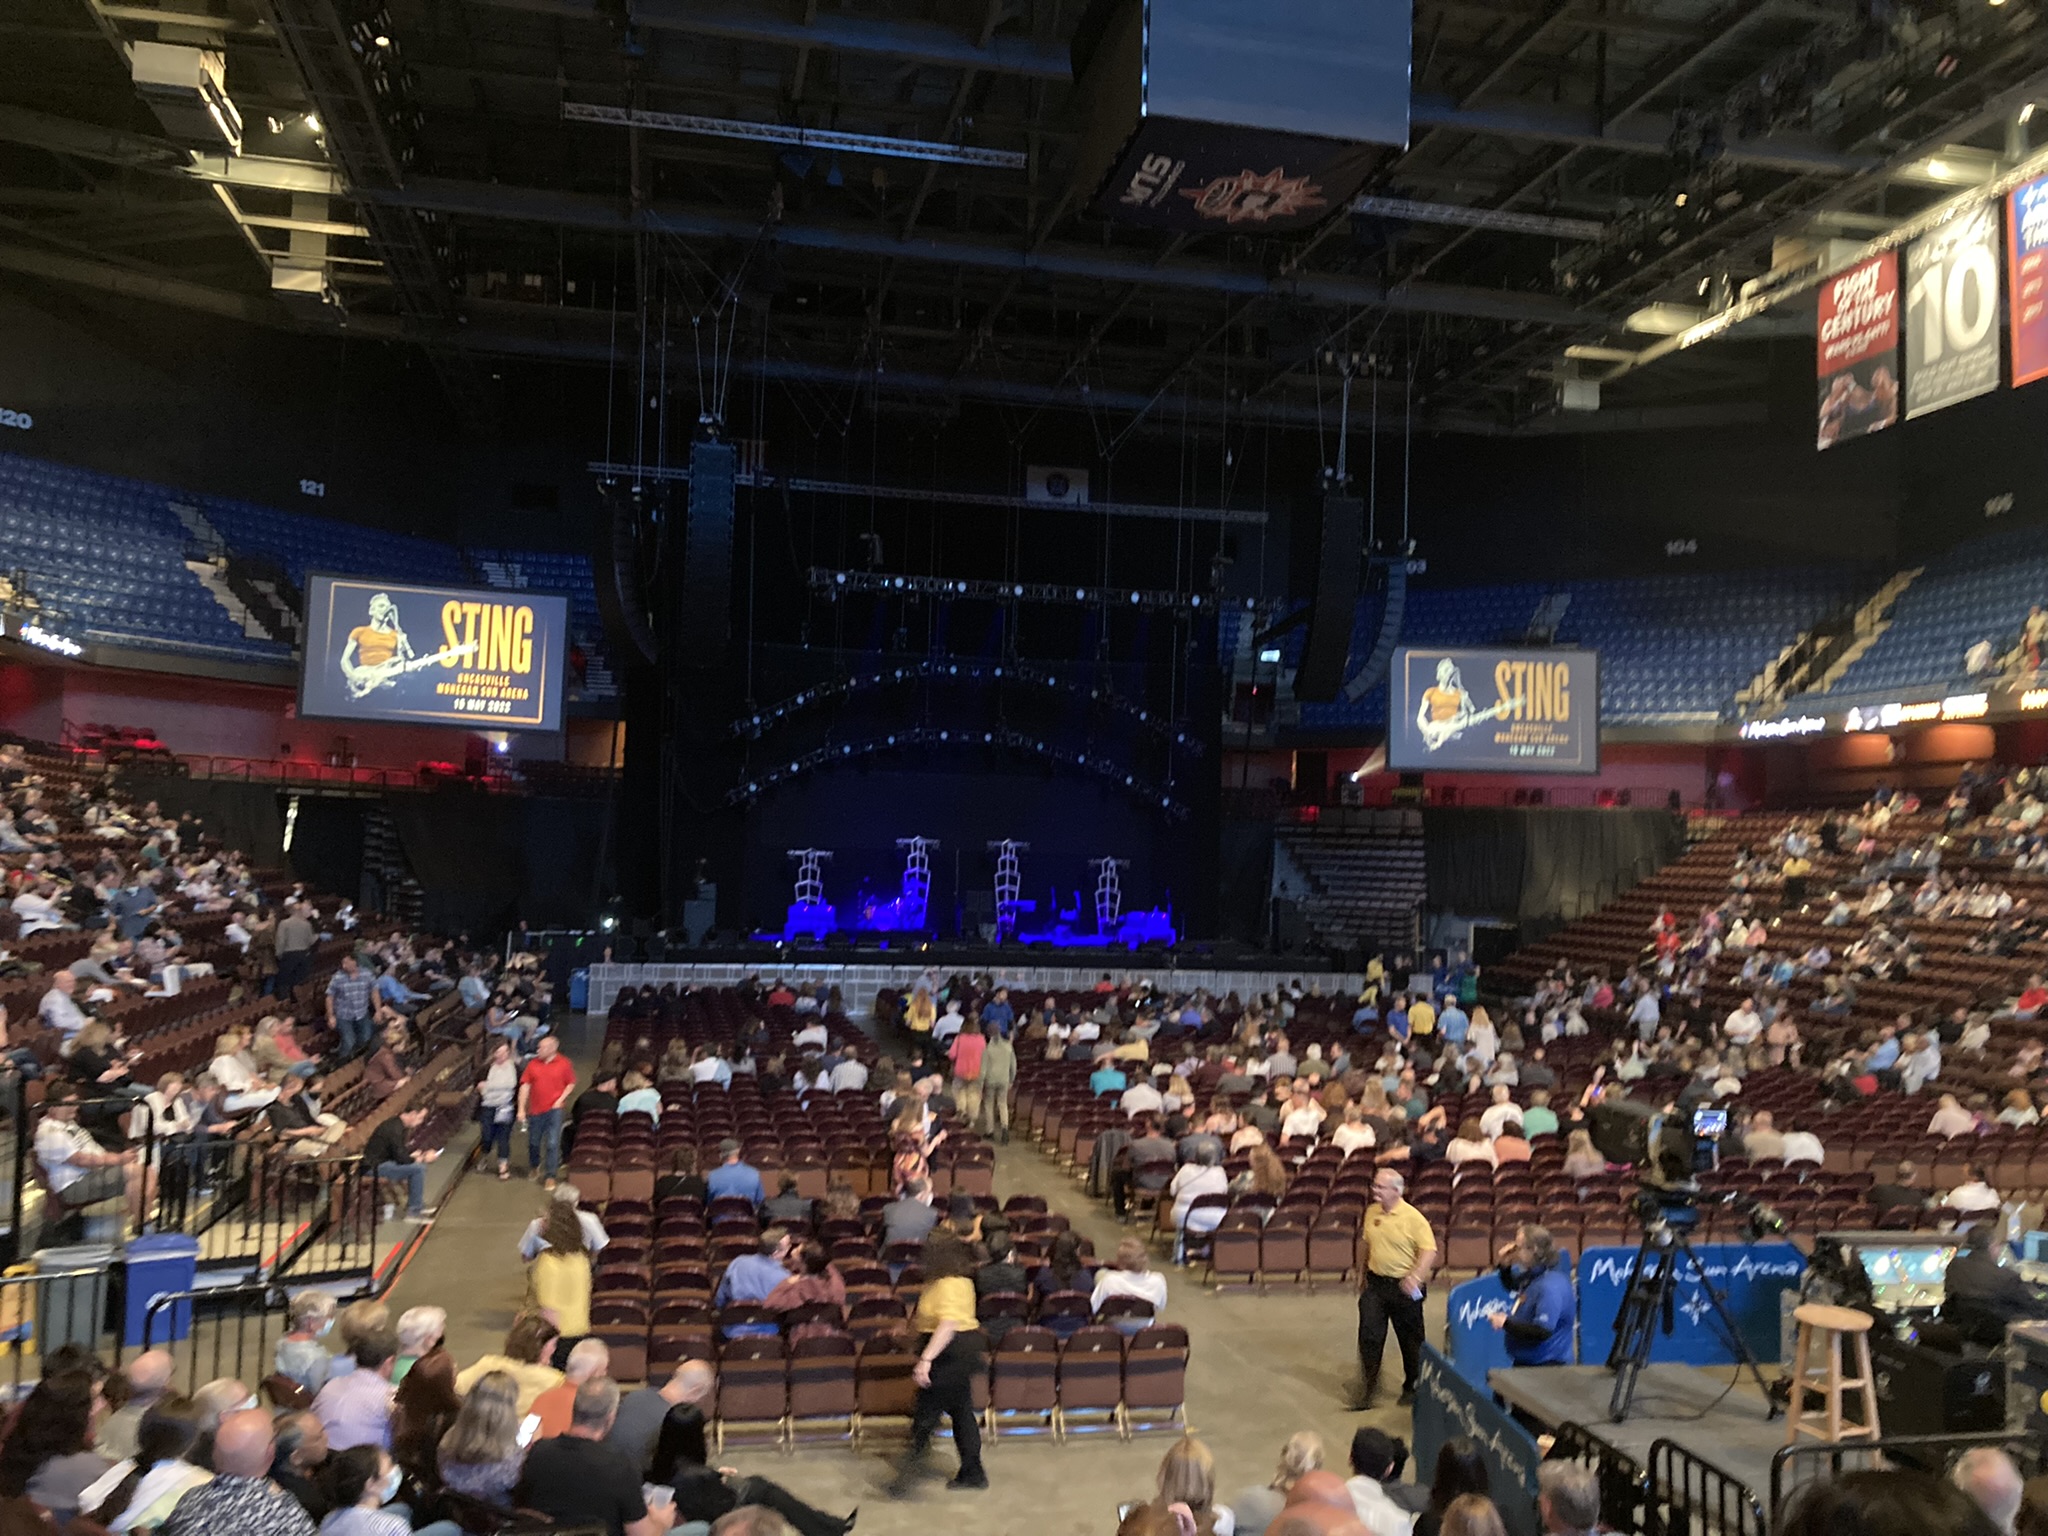 Mohegan Sun Arena, Events & Concerts in CT